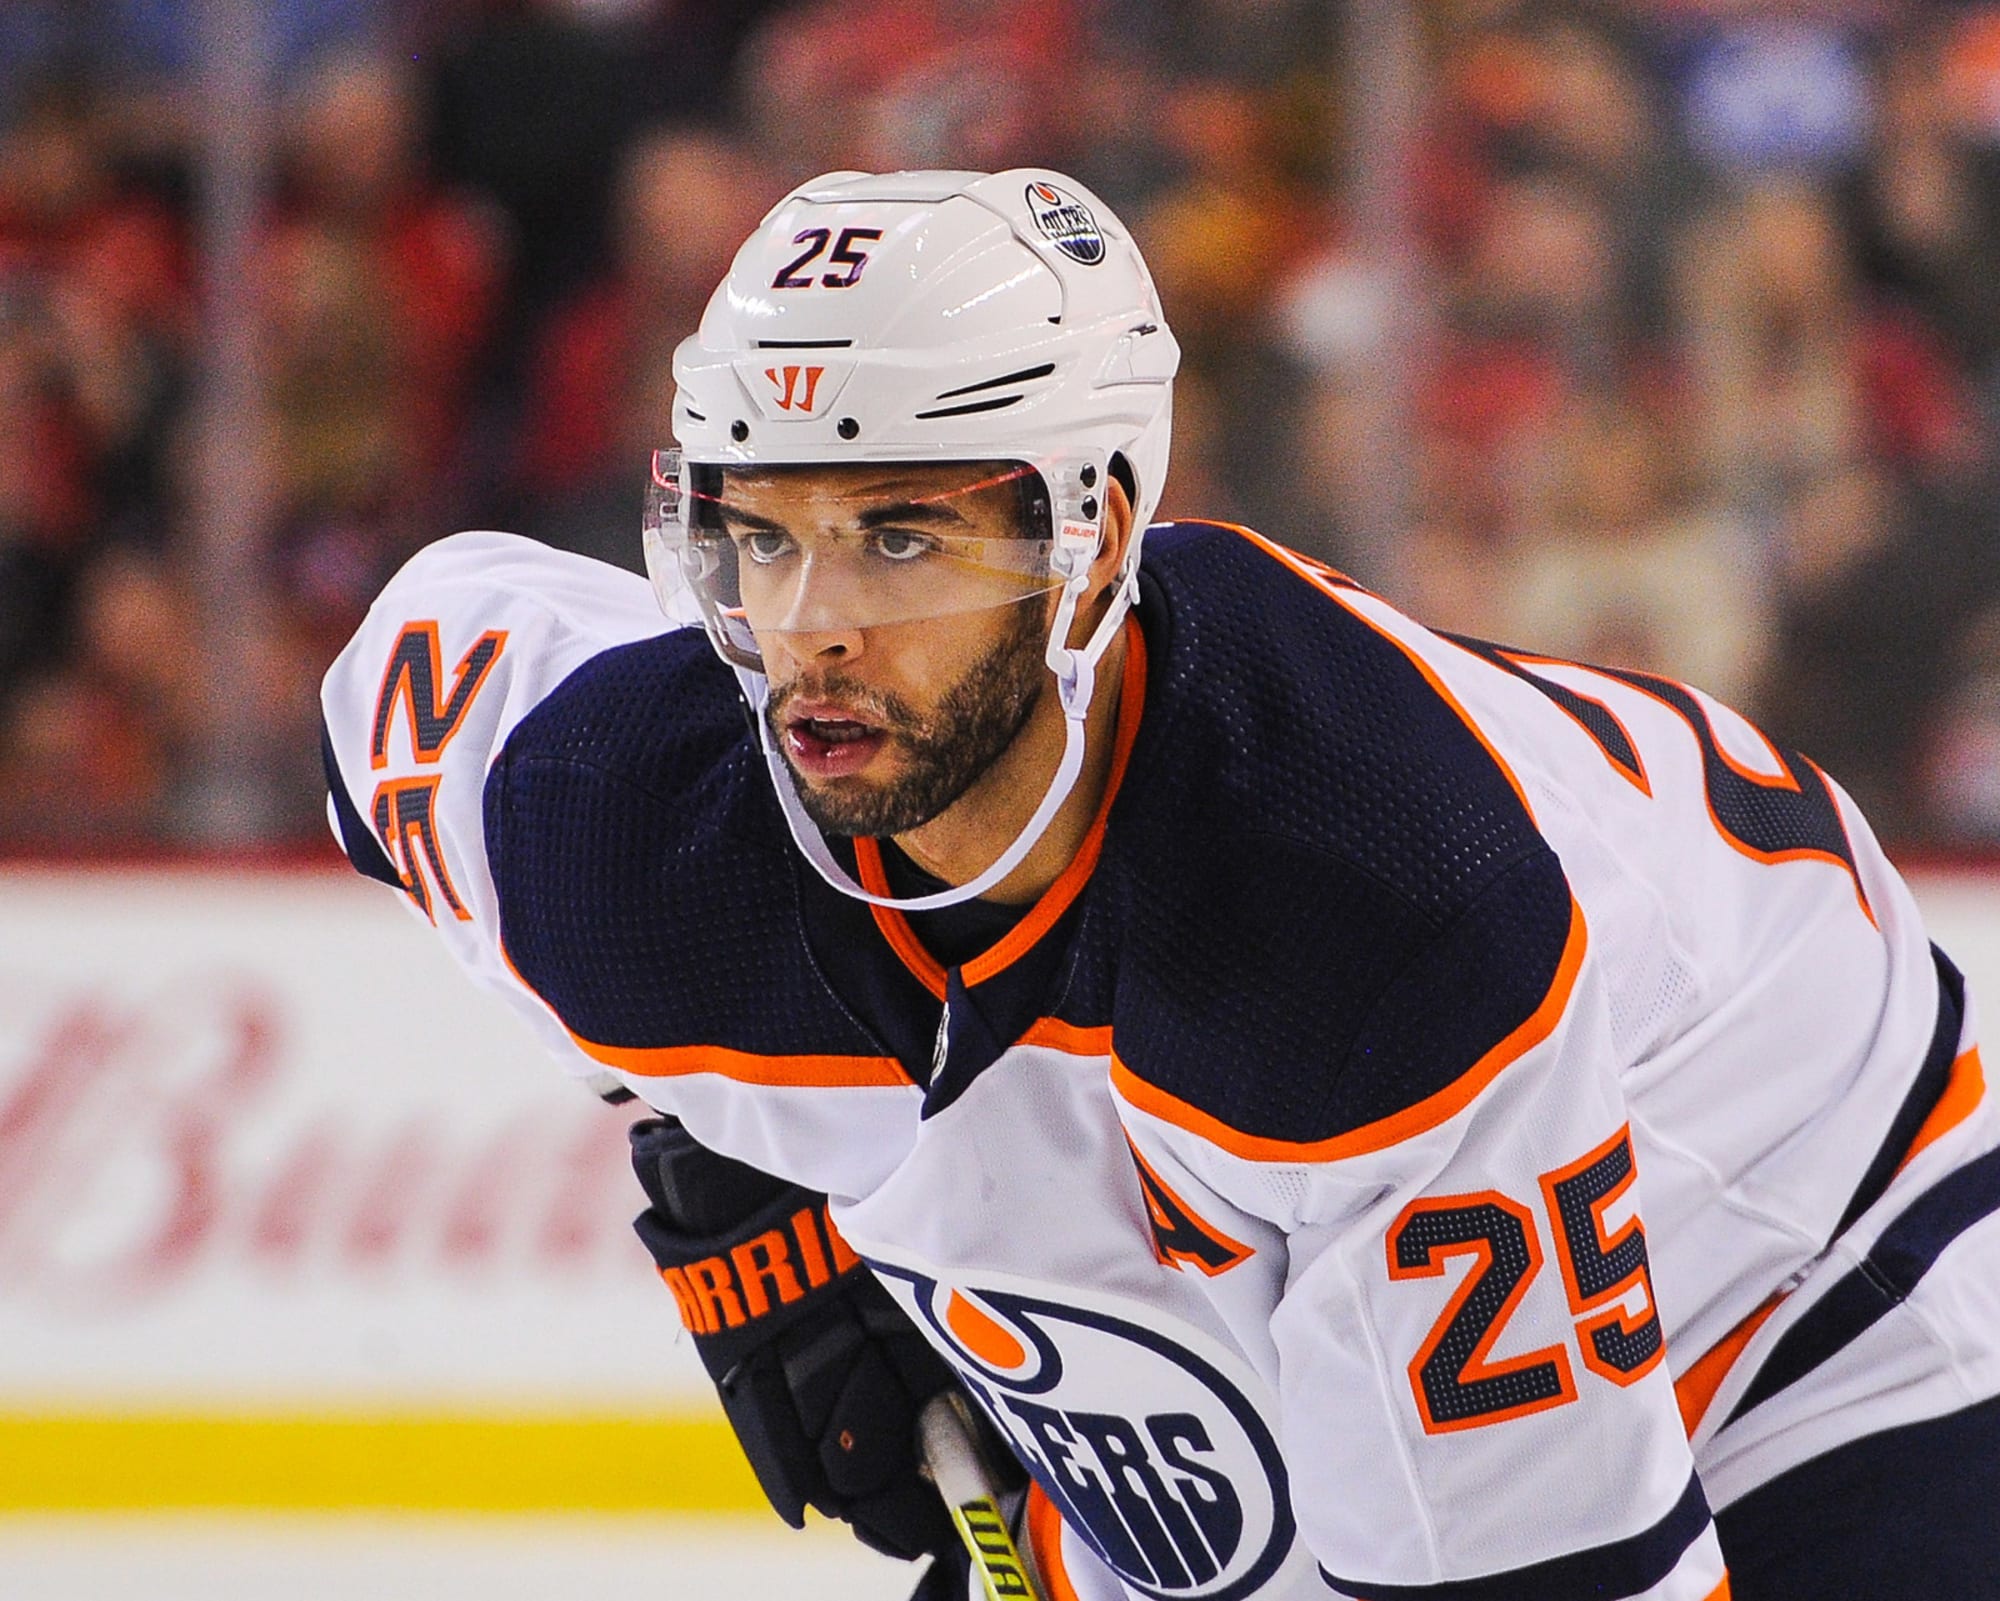 A Darnell Nurse to Toronto Trade Was in the Works According to